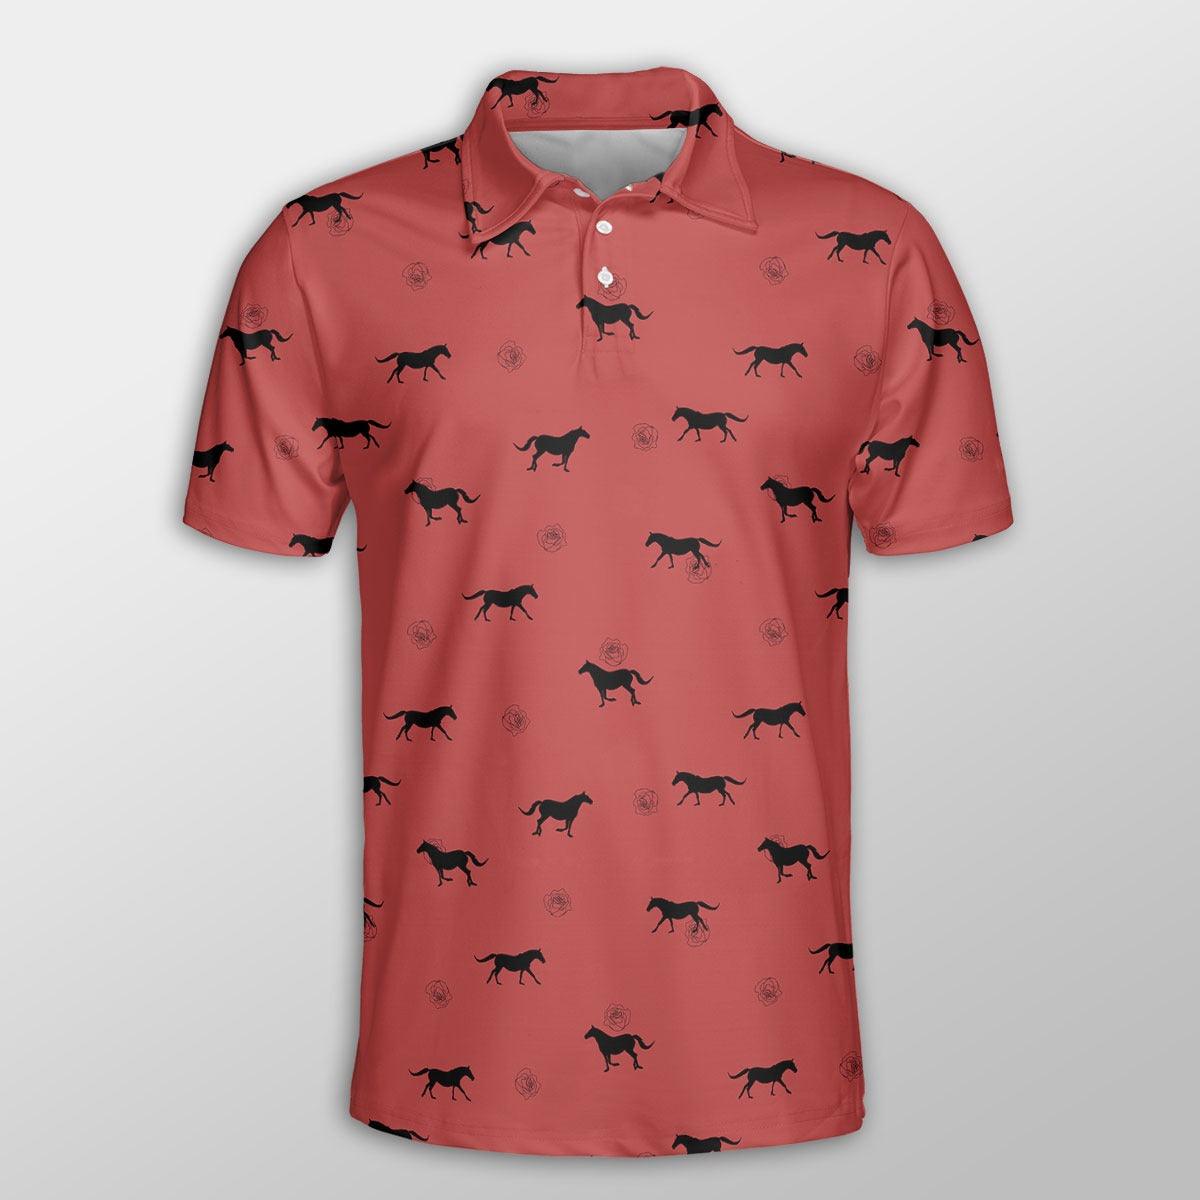 Horse Men Polo Shirts For Summer - Horse Pattern Red Background Pattern Shirts For Men - Perfect Gift For Horse Lovers, Cattle Lovers - Amzanimalsgift